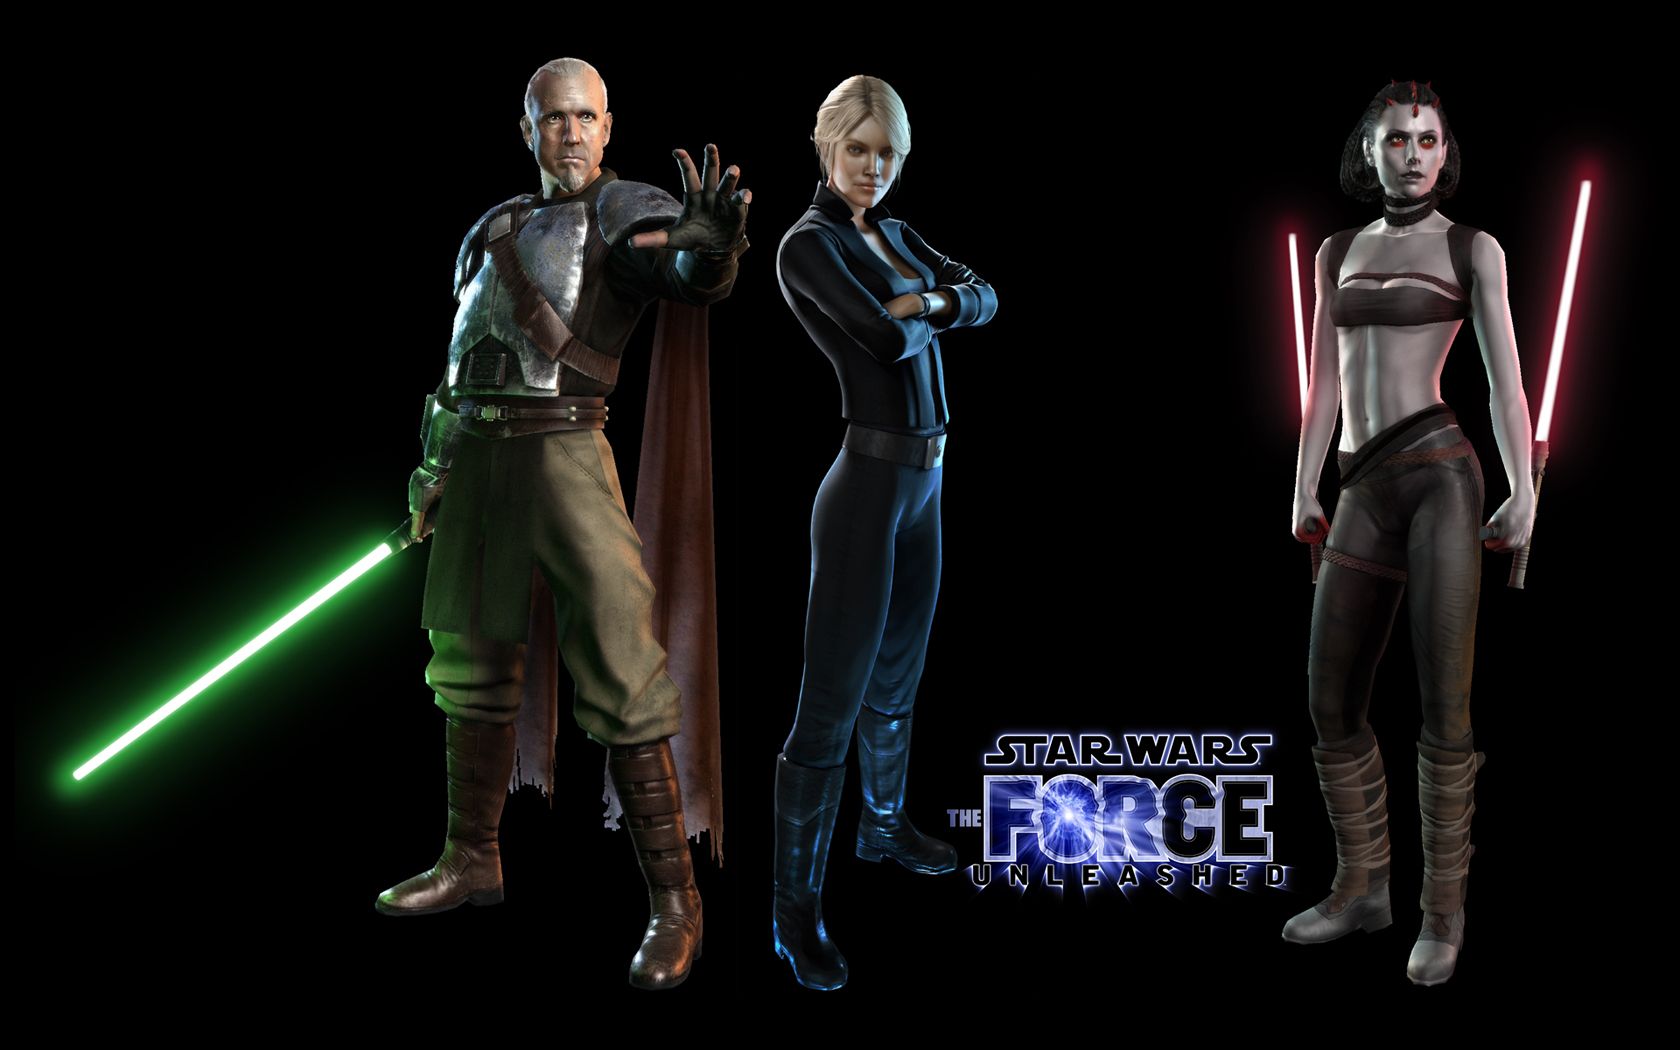 Star Wars: The Force Unleashed Wallpaper | Wii Play Games